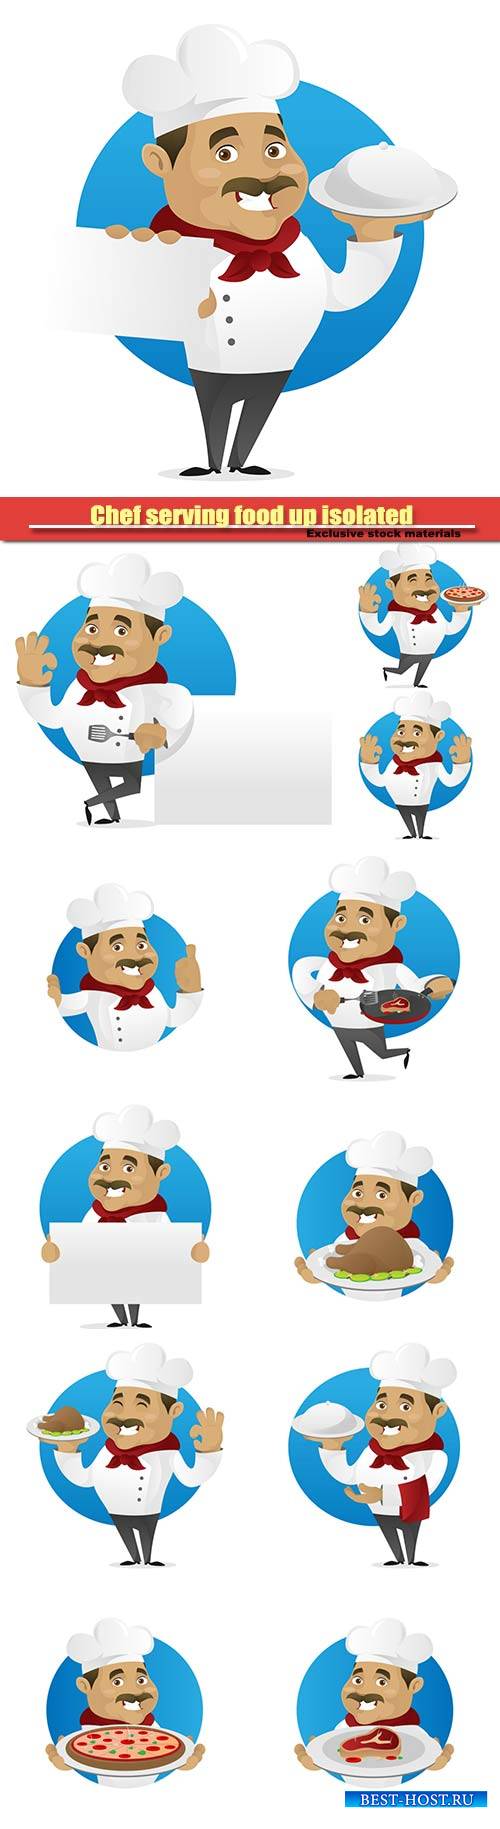 Chef serving food up isolated in white vector background